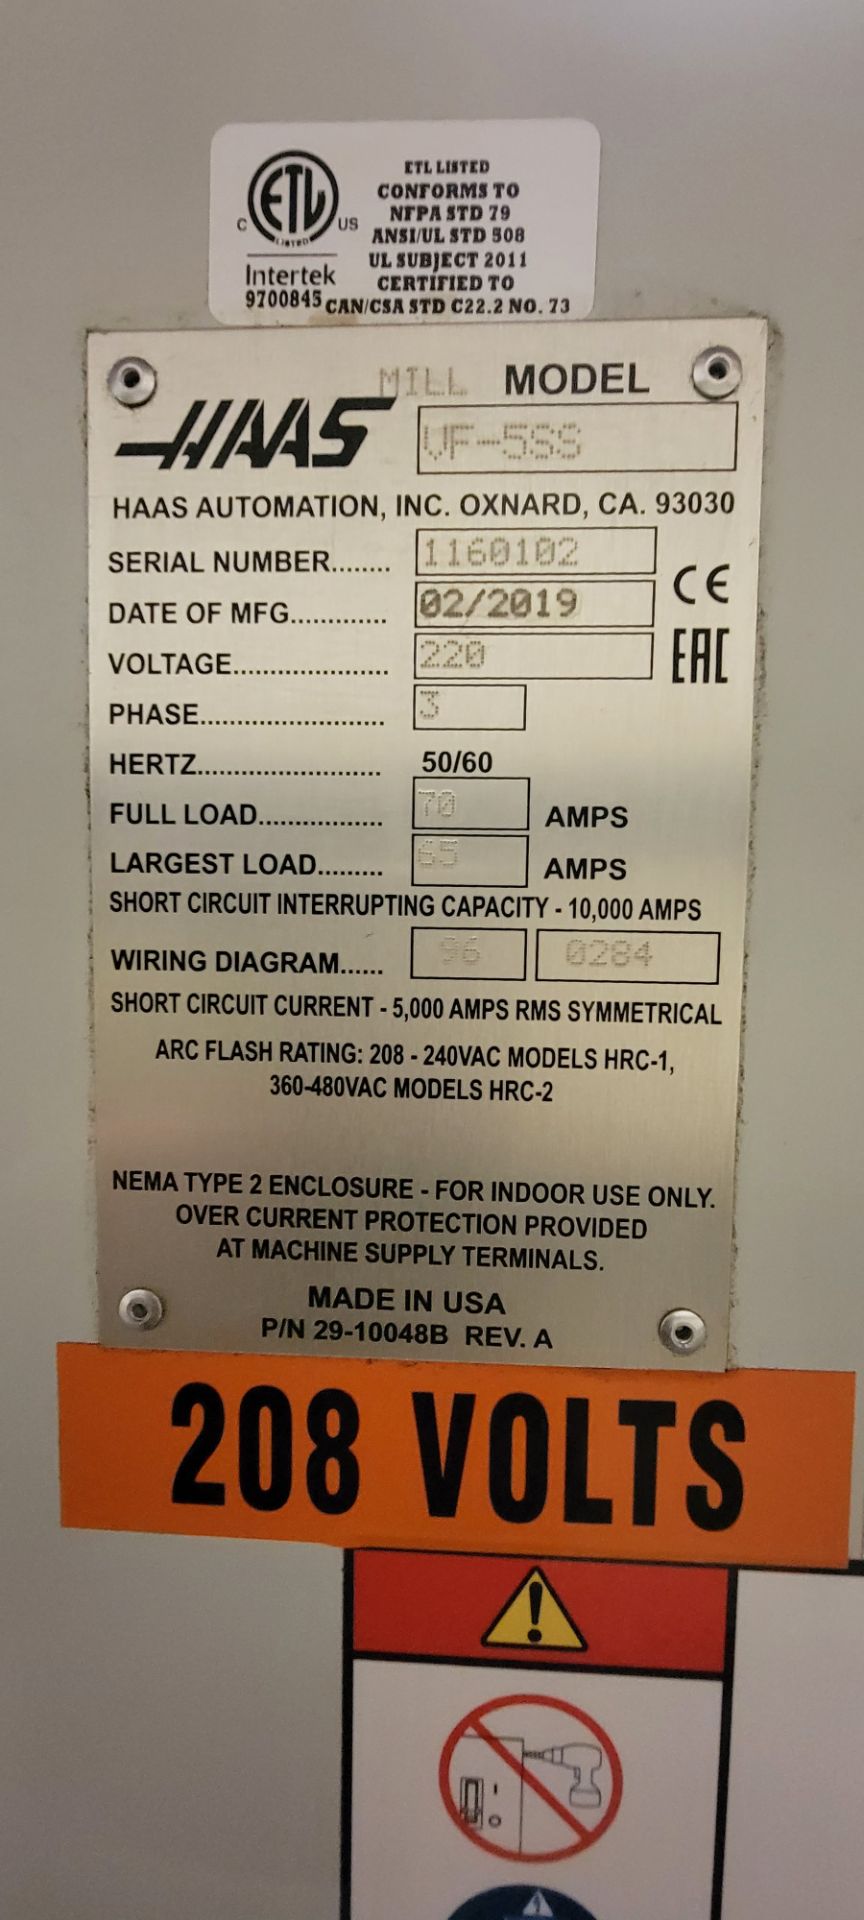 Haas VF-5SS CNC Vertical Maching Center - Image 24 of 24